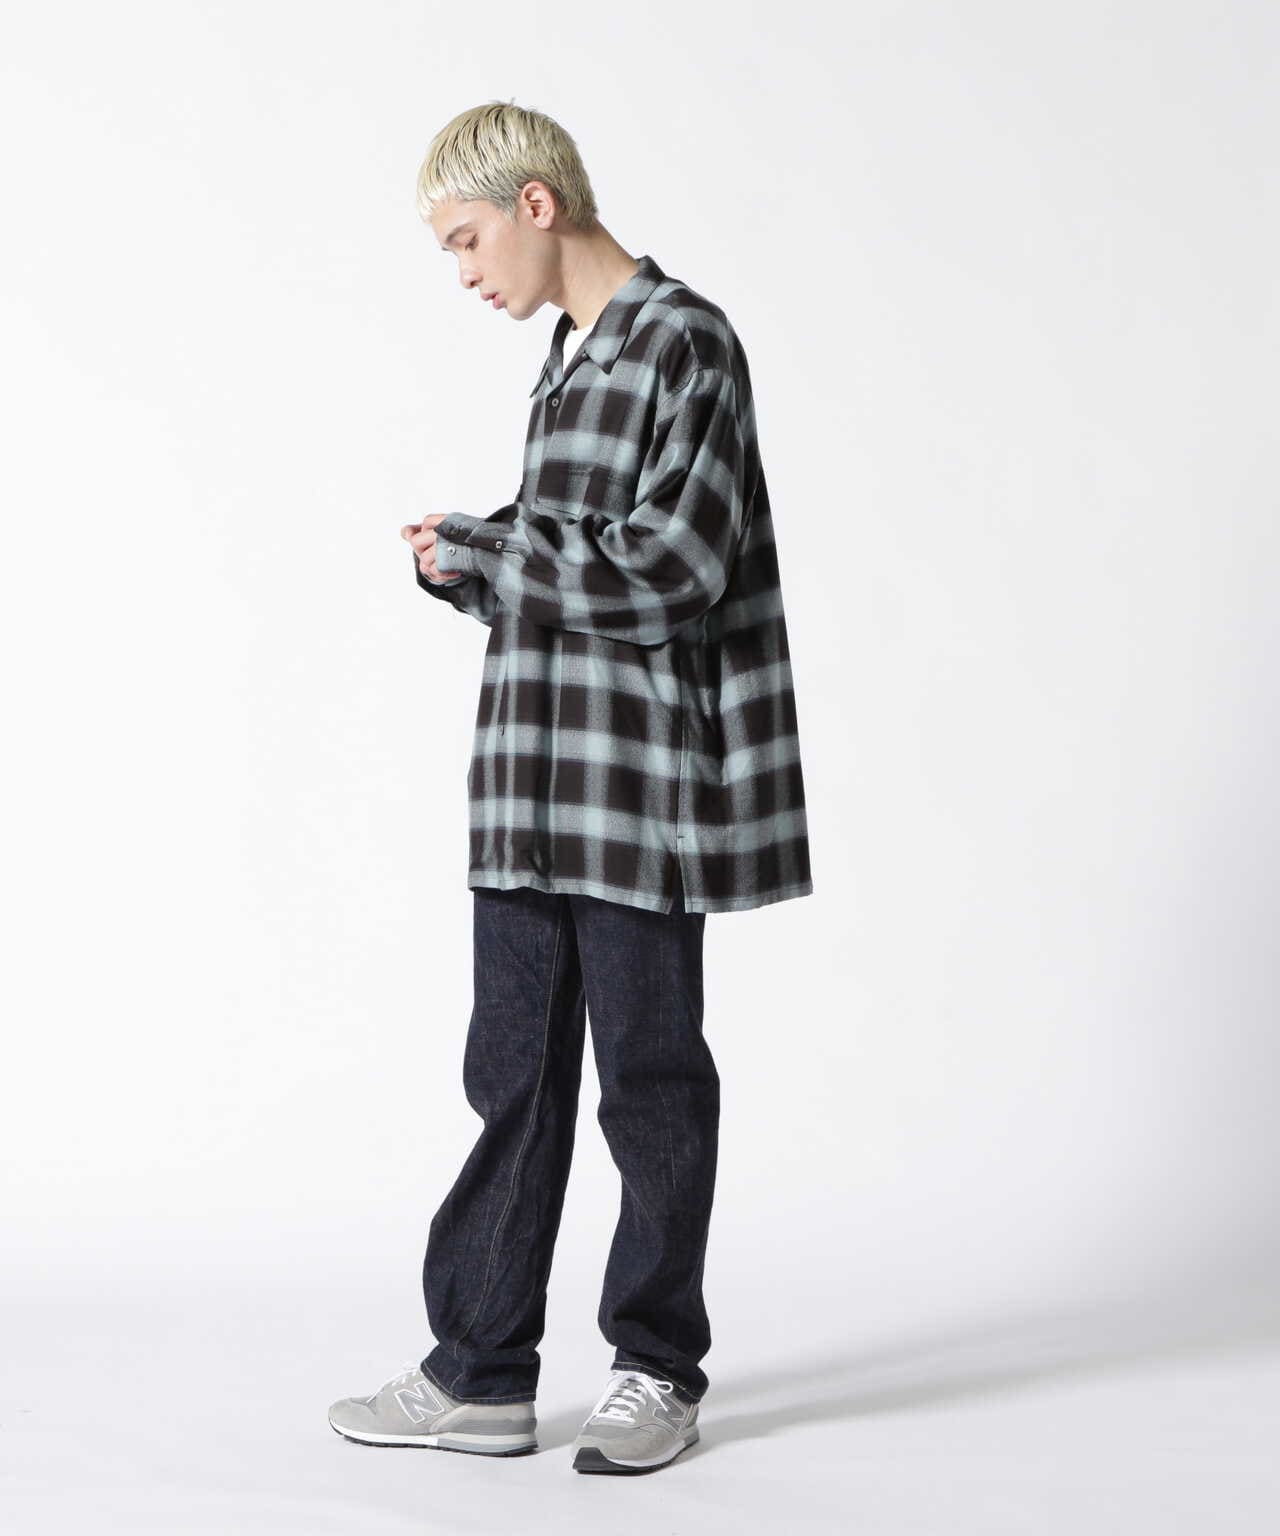 SUGARHILL 20ss OMBRE ROUND FRONT SHIRT オンブレ チェックシャツ ...